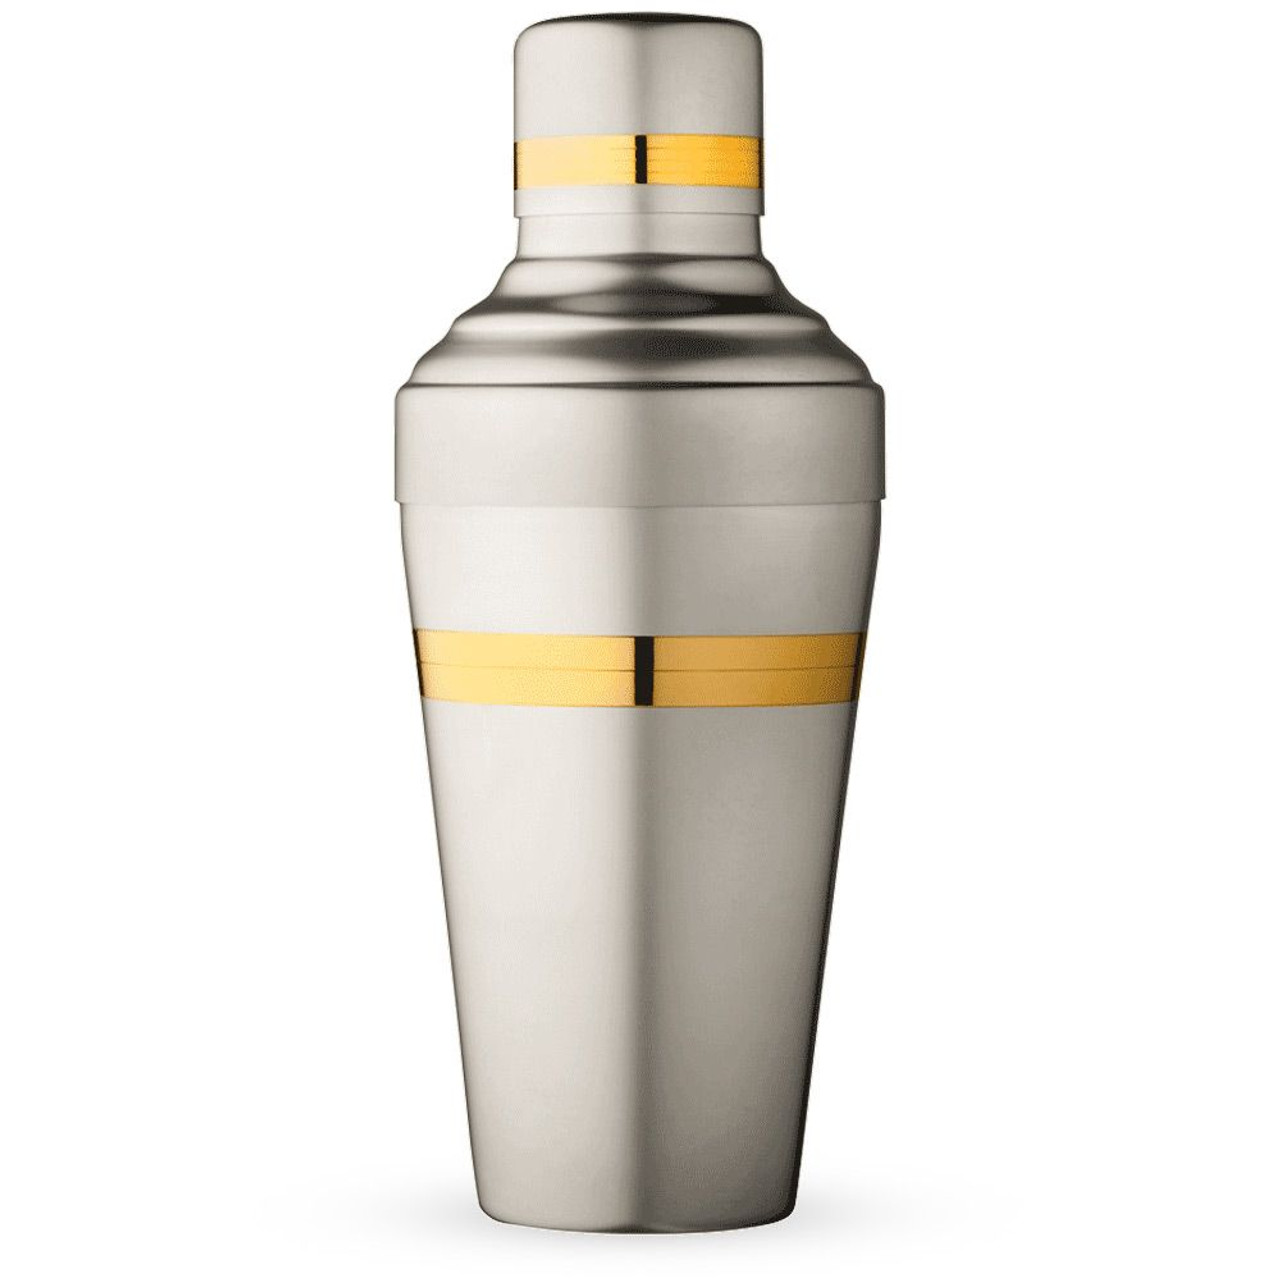 Host Cocktail Shaker, 5-in-1, 18 Ounce